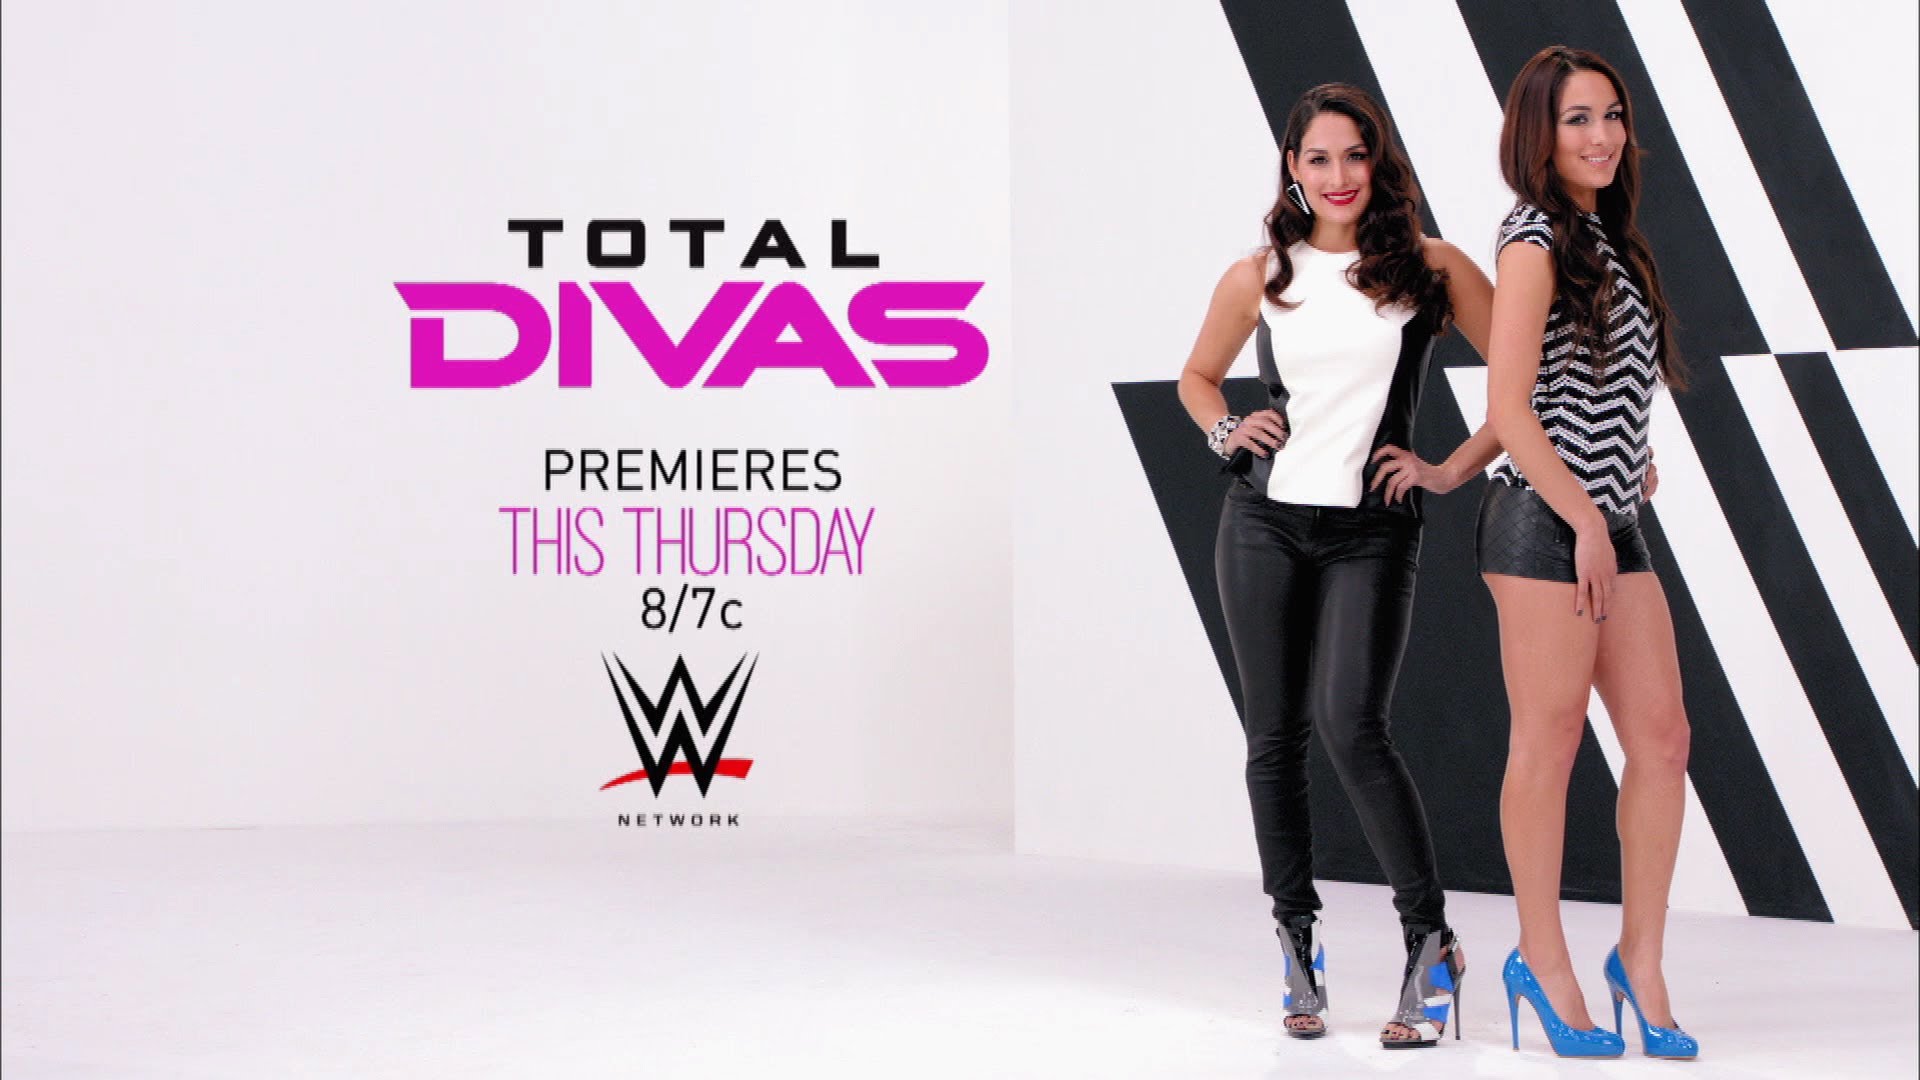 Wwe Total Divas Wallpaper HD Background Of Your Choice